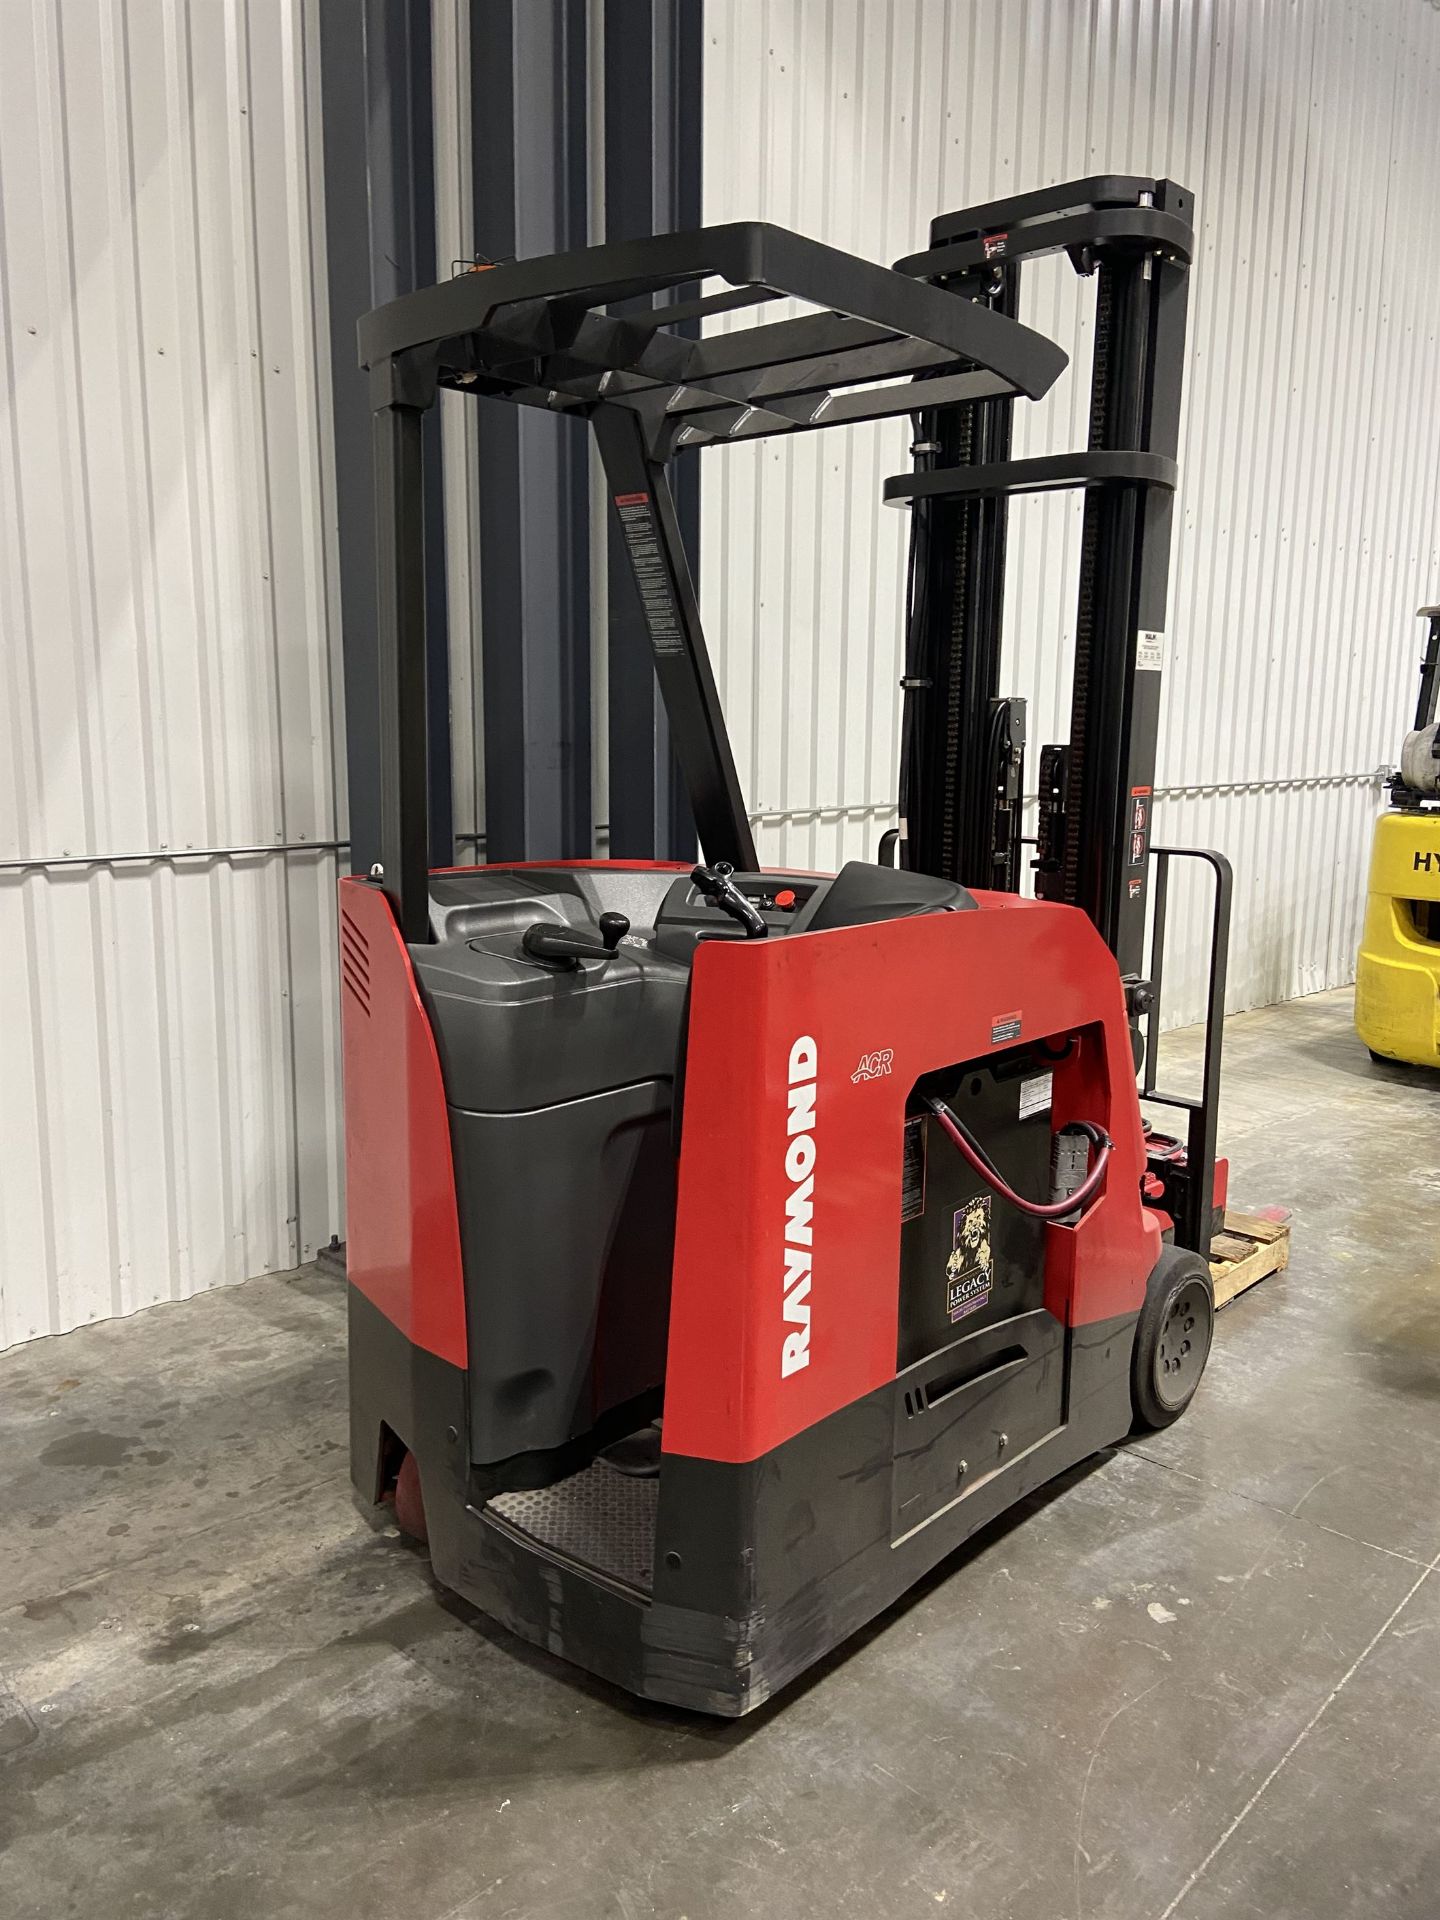 2018 RAYMOND 425-C50TT 5,000 lb Electric Stand Up Forklift, s/n 425-18-57539, w/ 36V Charger, 251" - Image 3 of 5